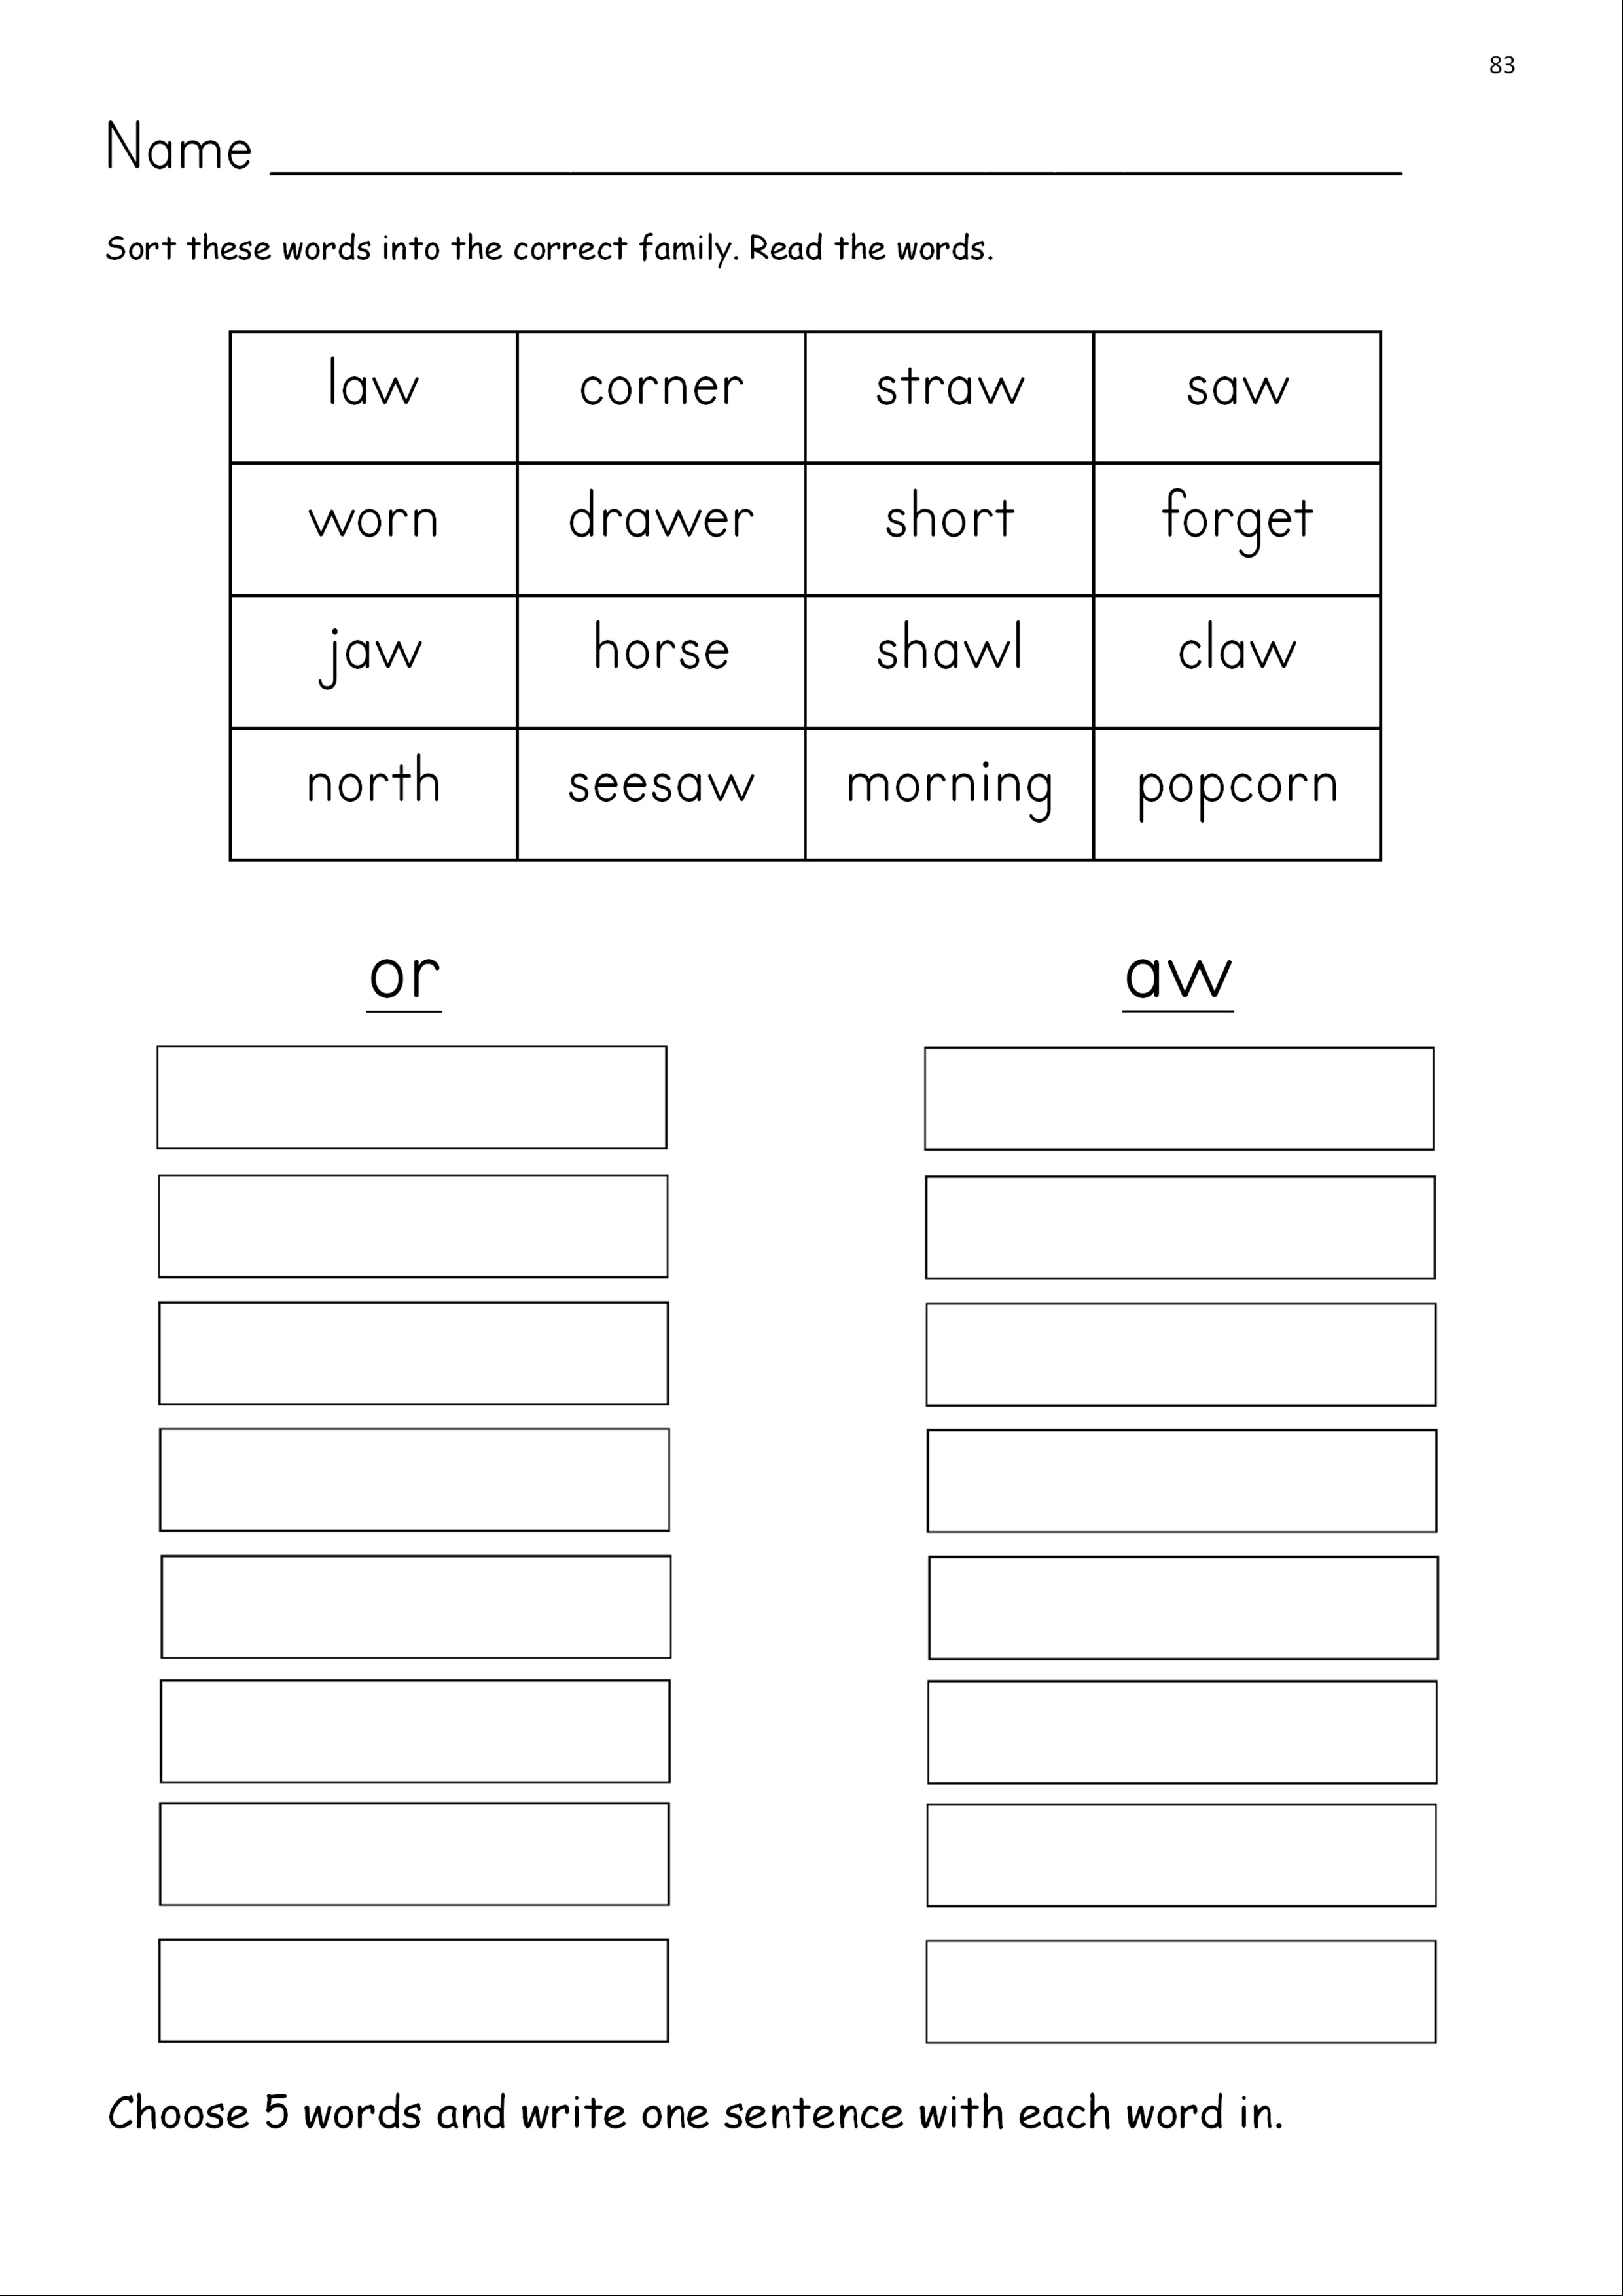 aw-phonics-worksheets-sound-it-out-phonics